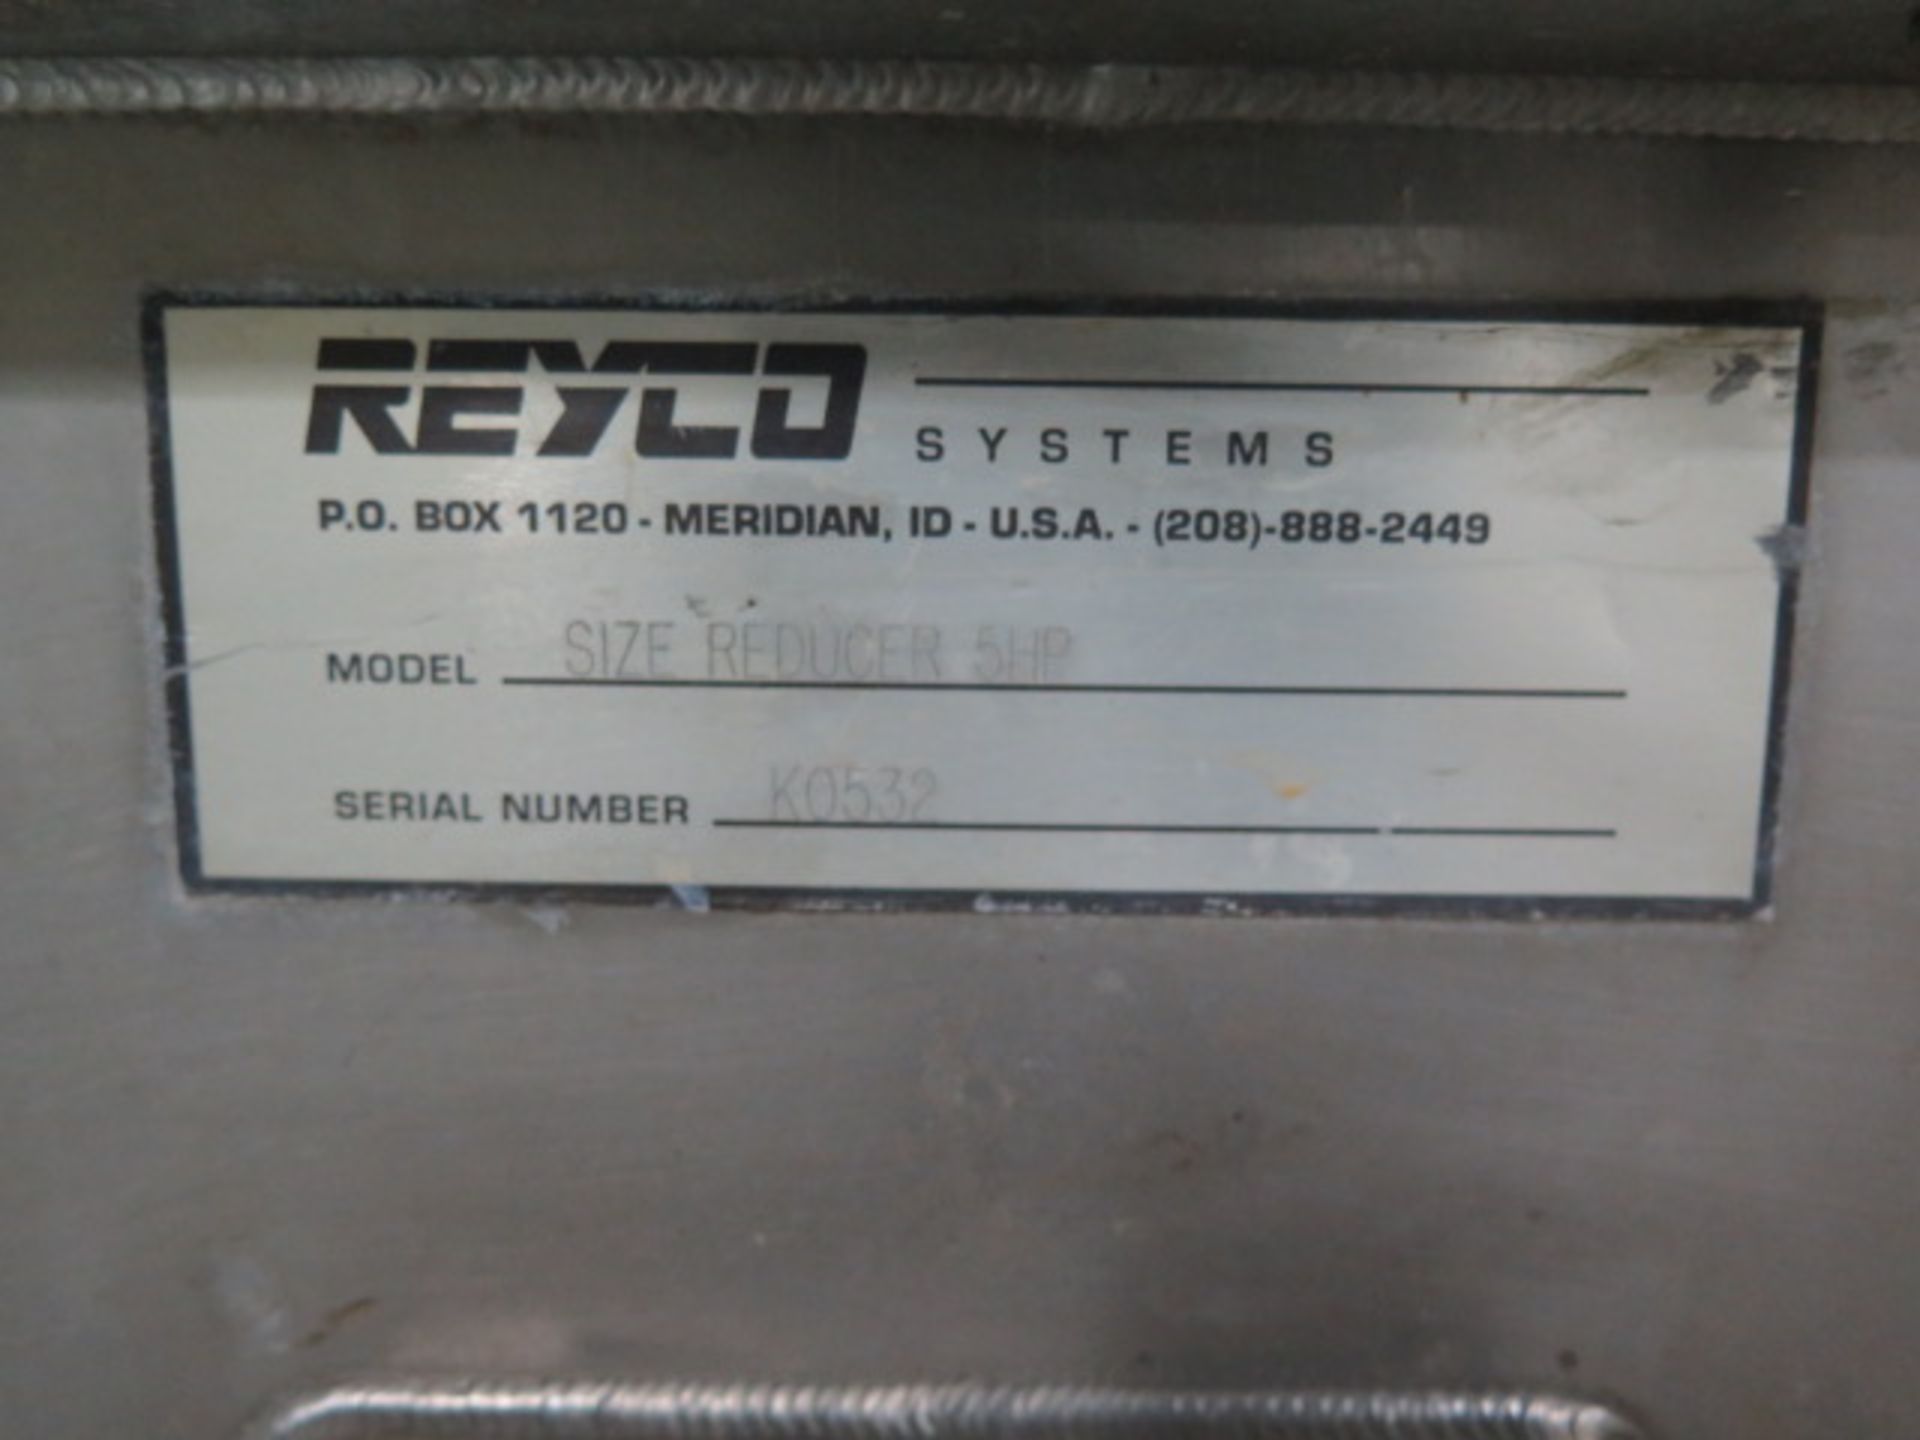 Reyco mdl. SIZE REDUCER 5HP Conveyong System (Waste Disposal) - Image 5 of 5